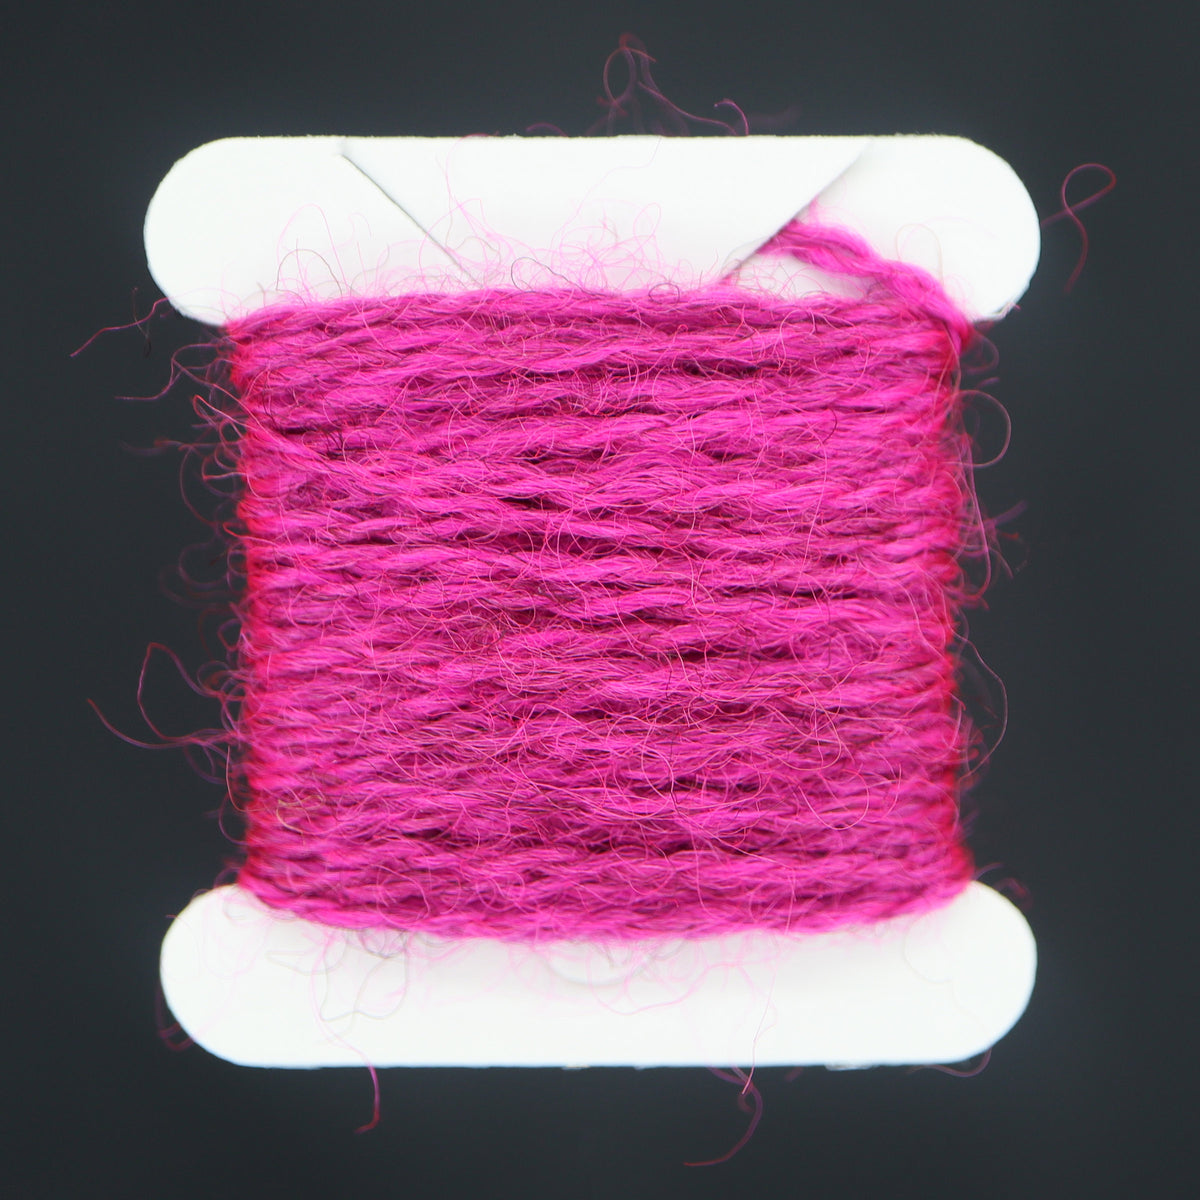 Neon Pink worsted wool hand dyed 3 ply soft wool yarn from our American  farm, free shipping offer farm yarn